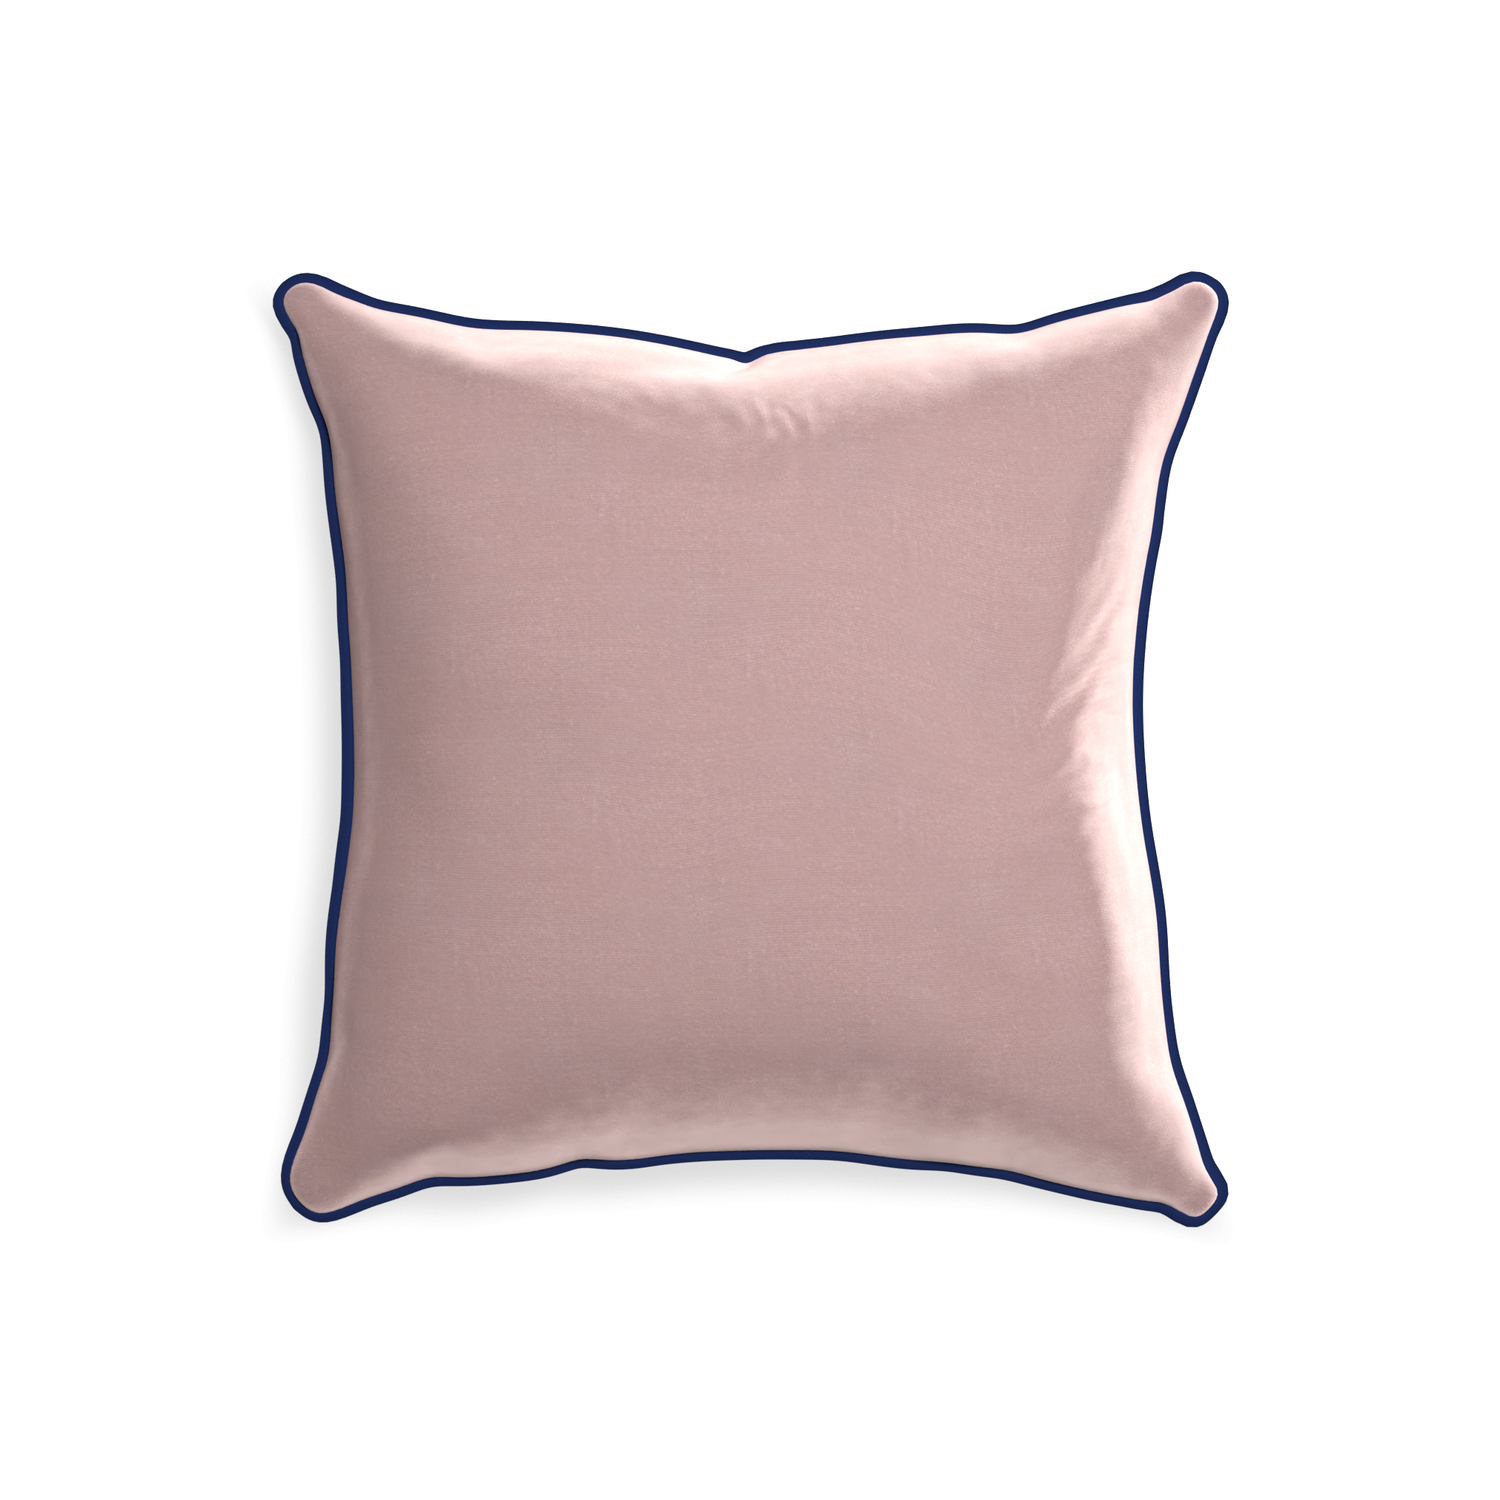 20-square mauve velvet custom pillow with midnight piping on white background